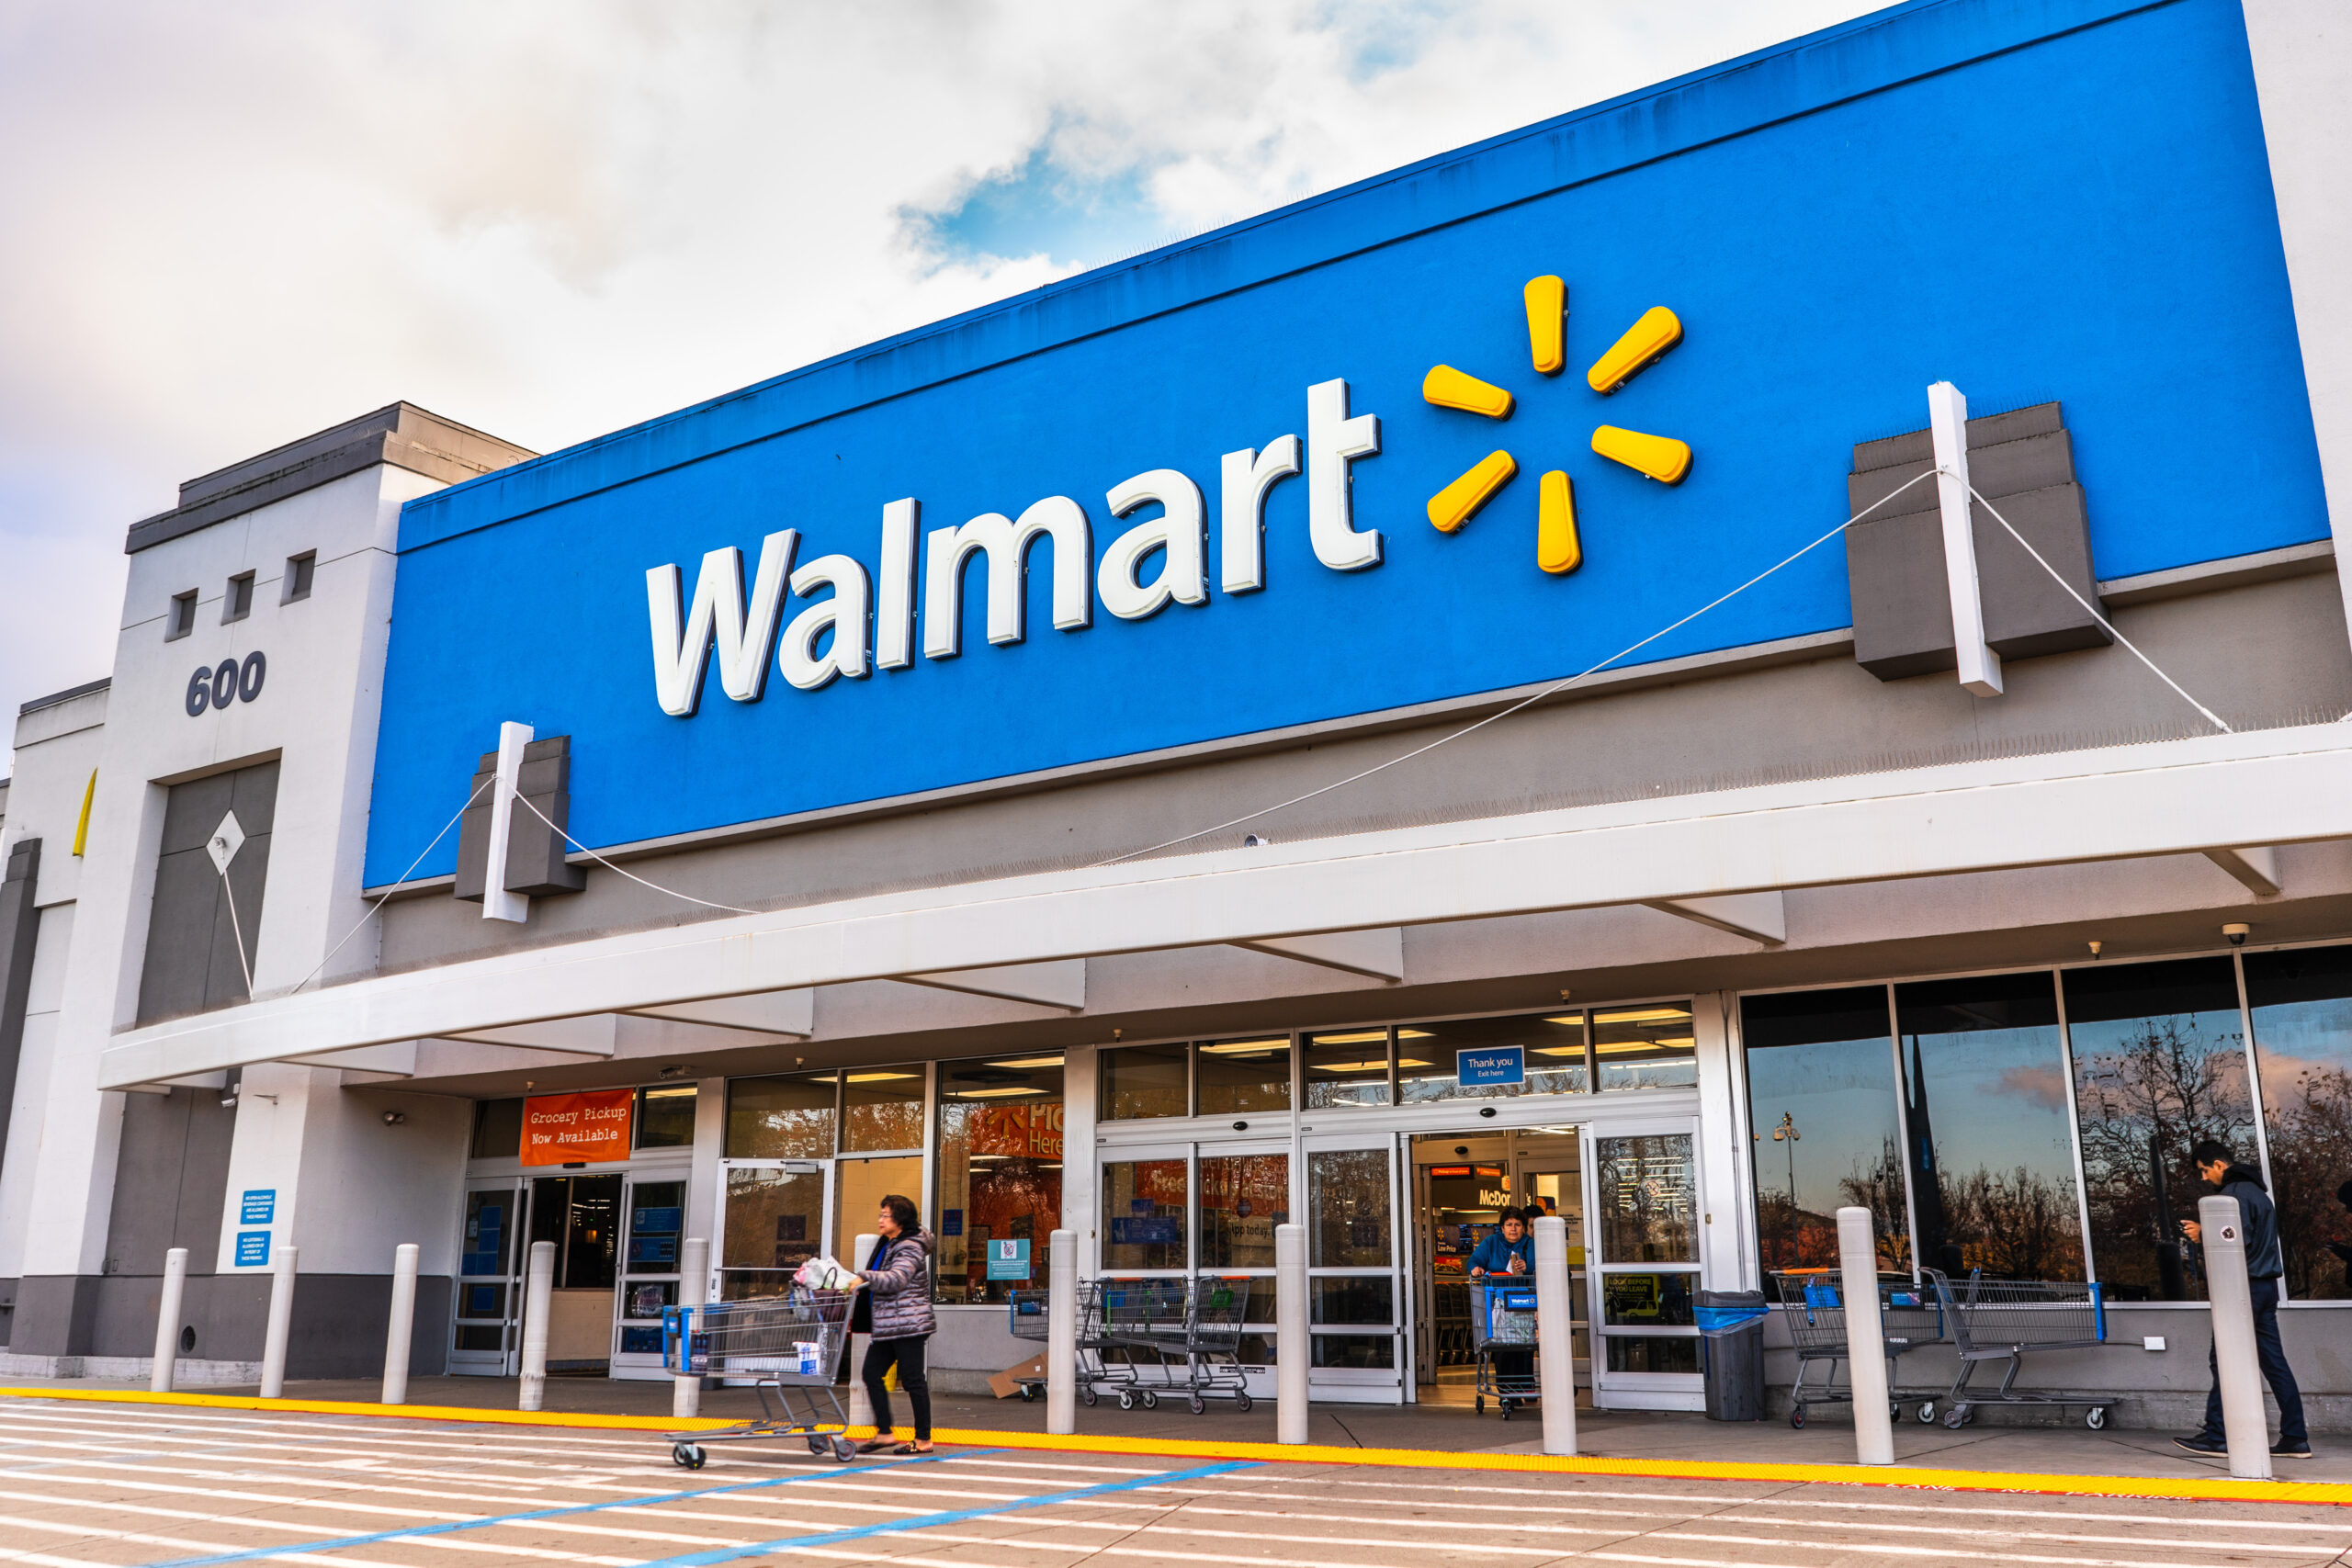 How to Become a Walmart Marketplace Seller